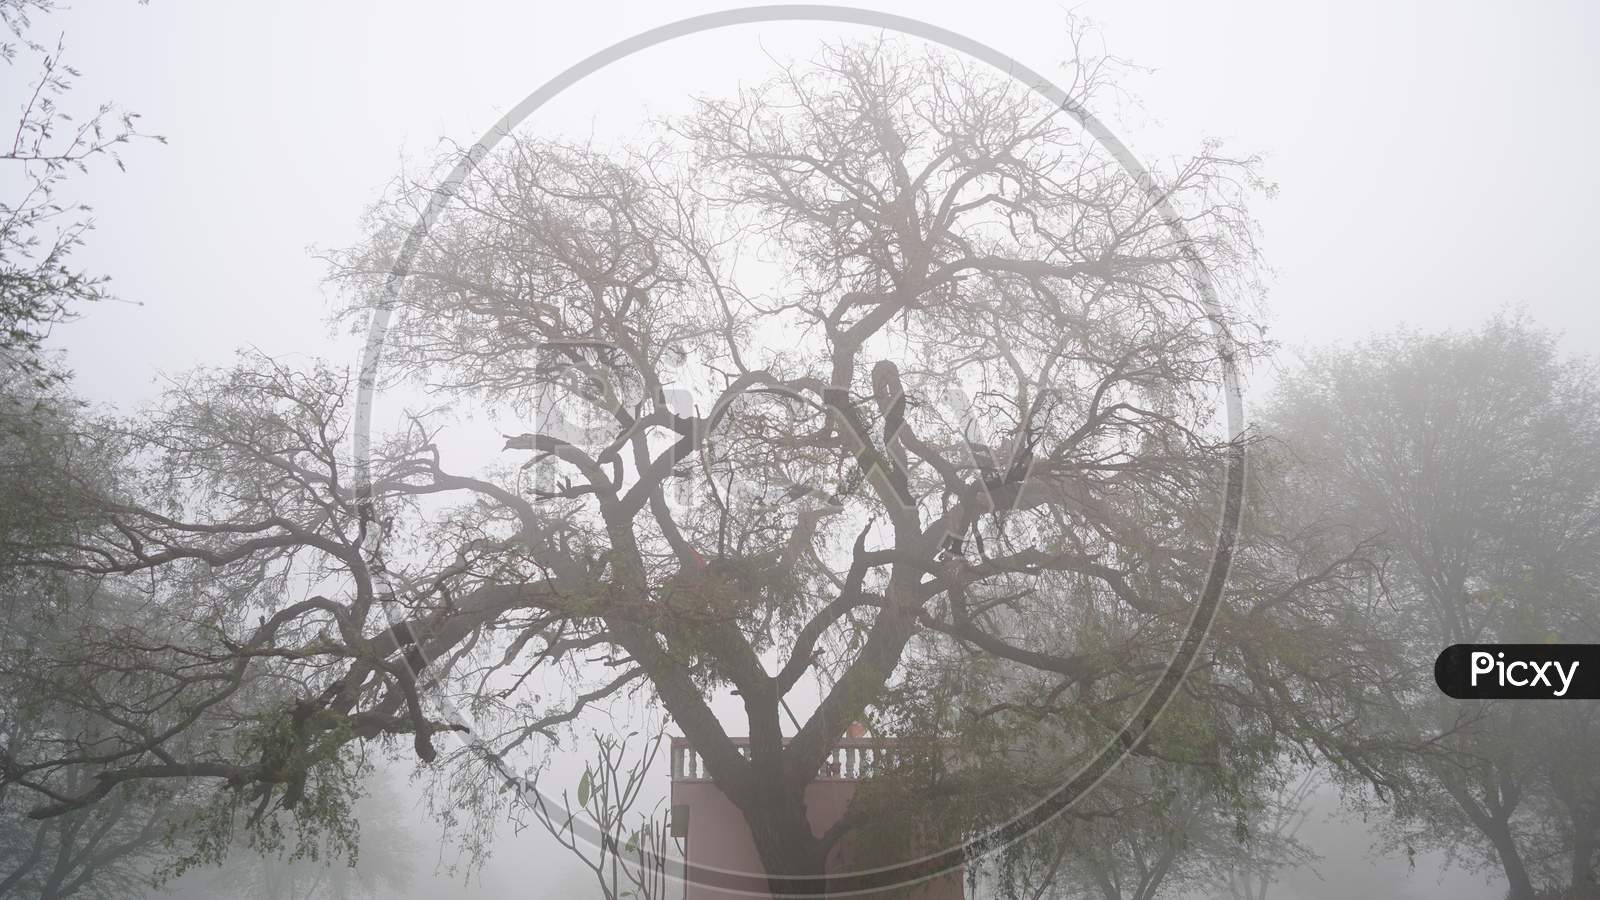 Cold Winter, Snow Covered Khejri Tree View Without Leaves In The Foggy Morning. Attractive Hazy Morning With Isolated Tree Branches.